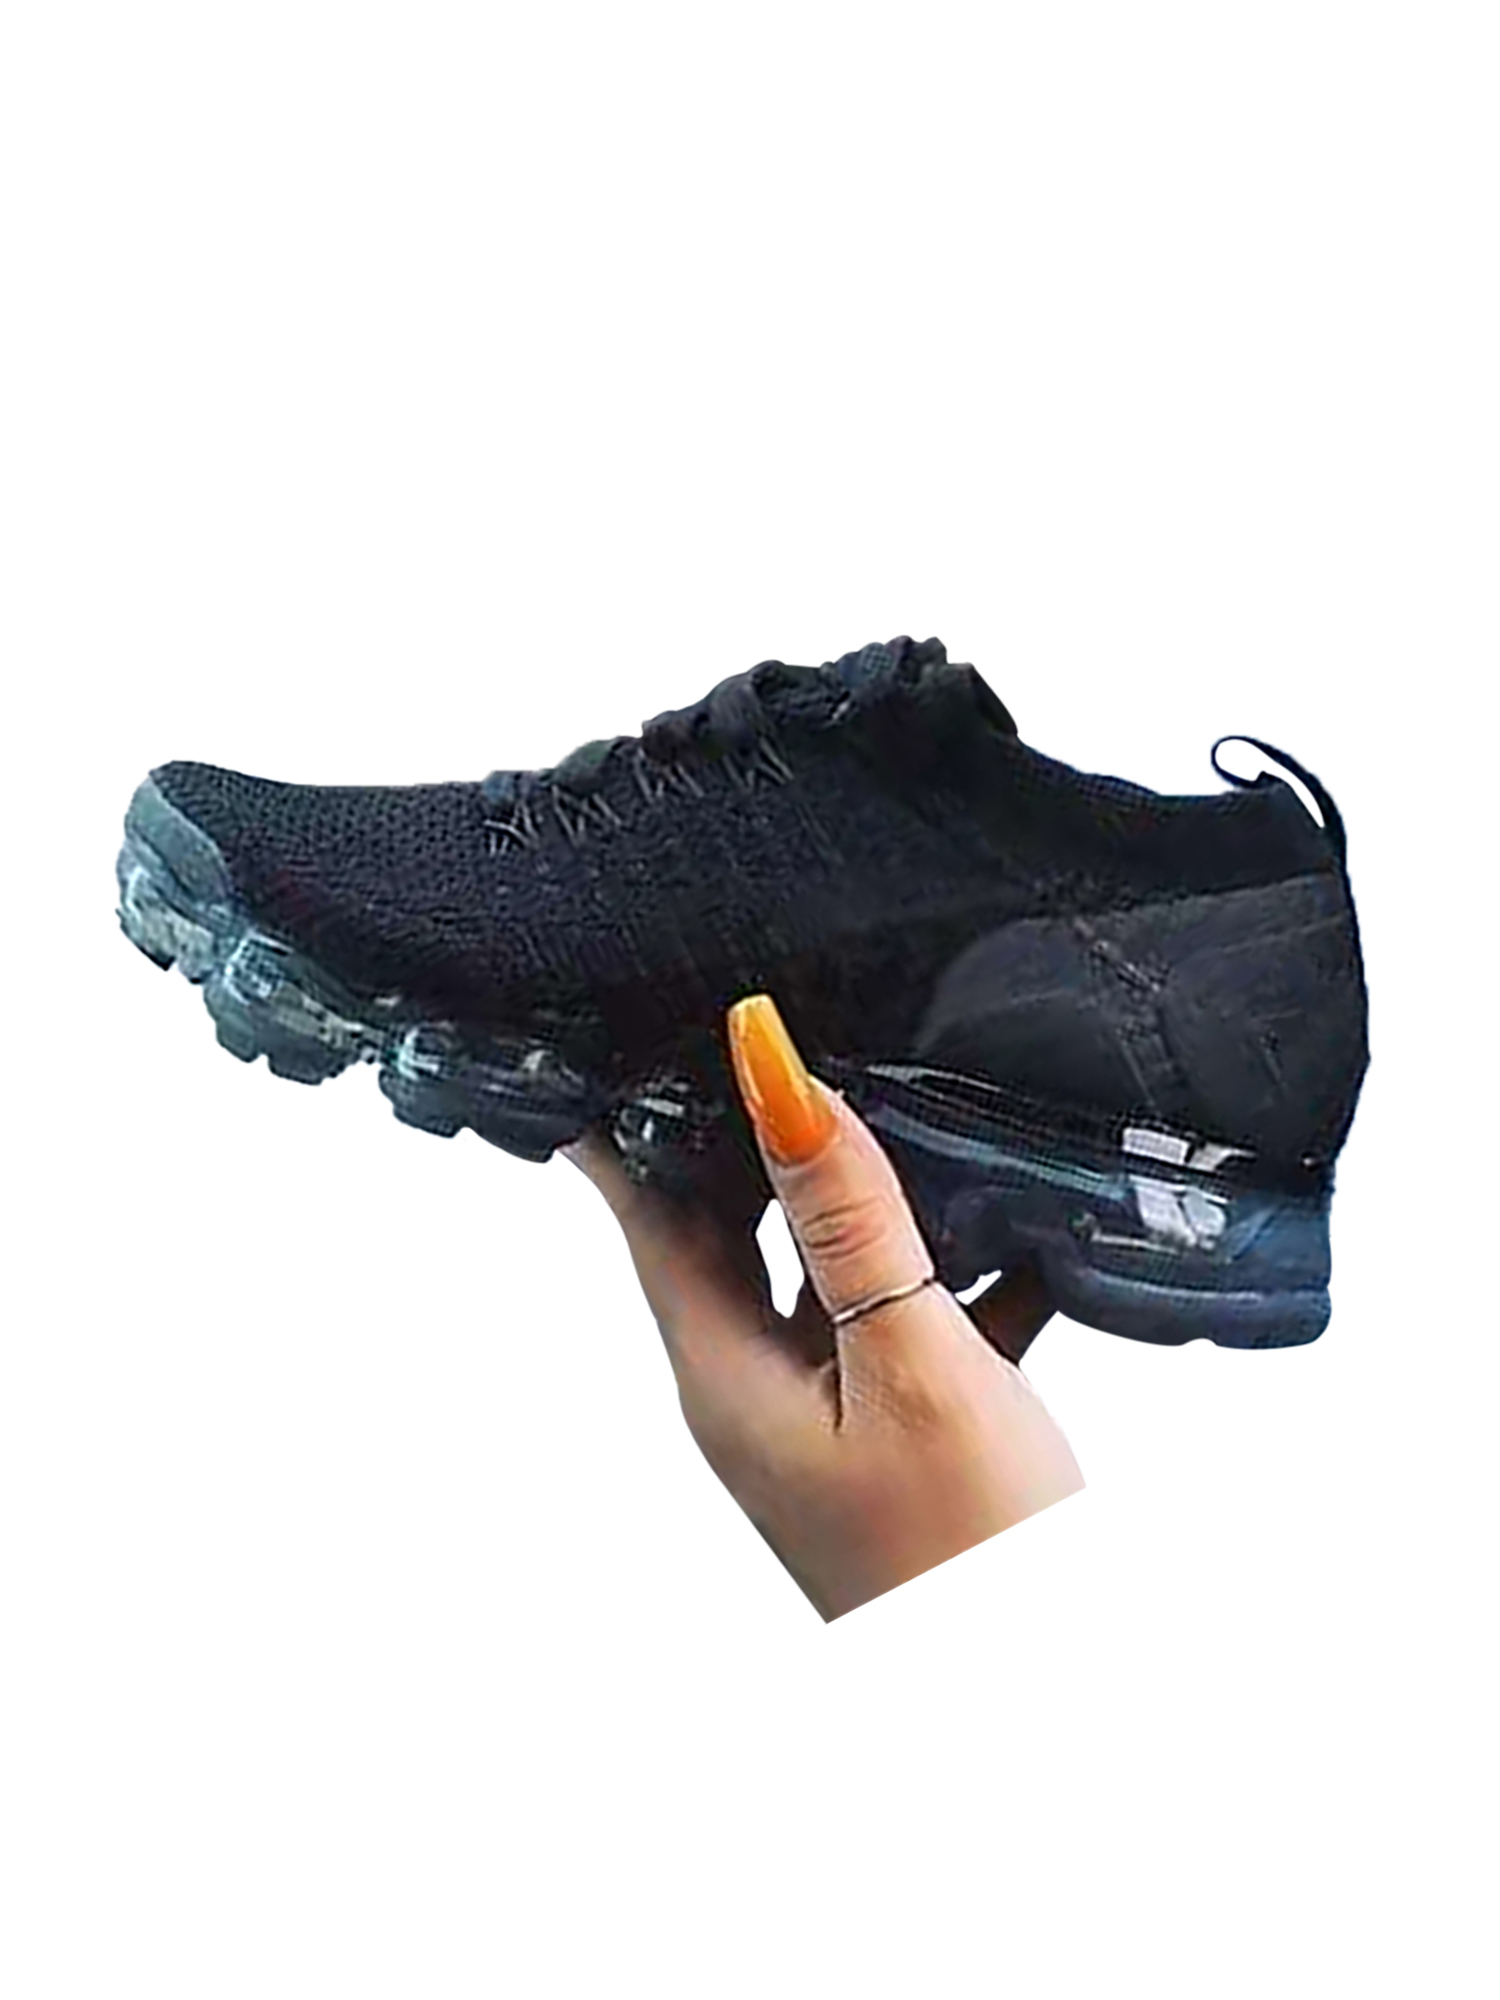 Details about  / Womens Running Athletic Sneakers Canvas Sports Casual Breathable Shoes Fashion